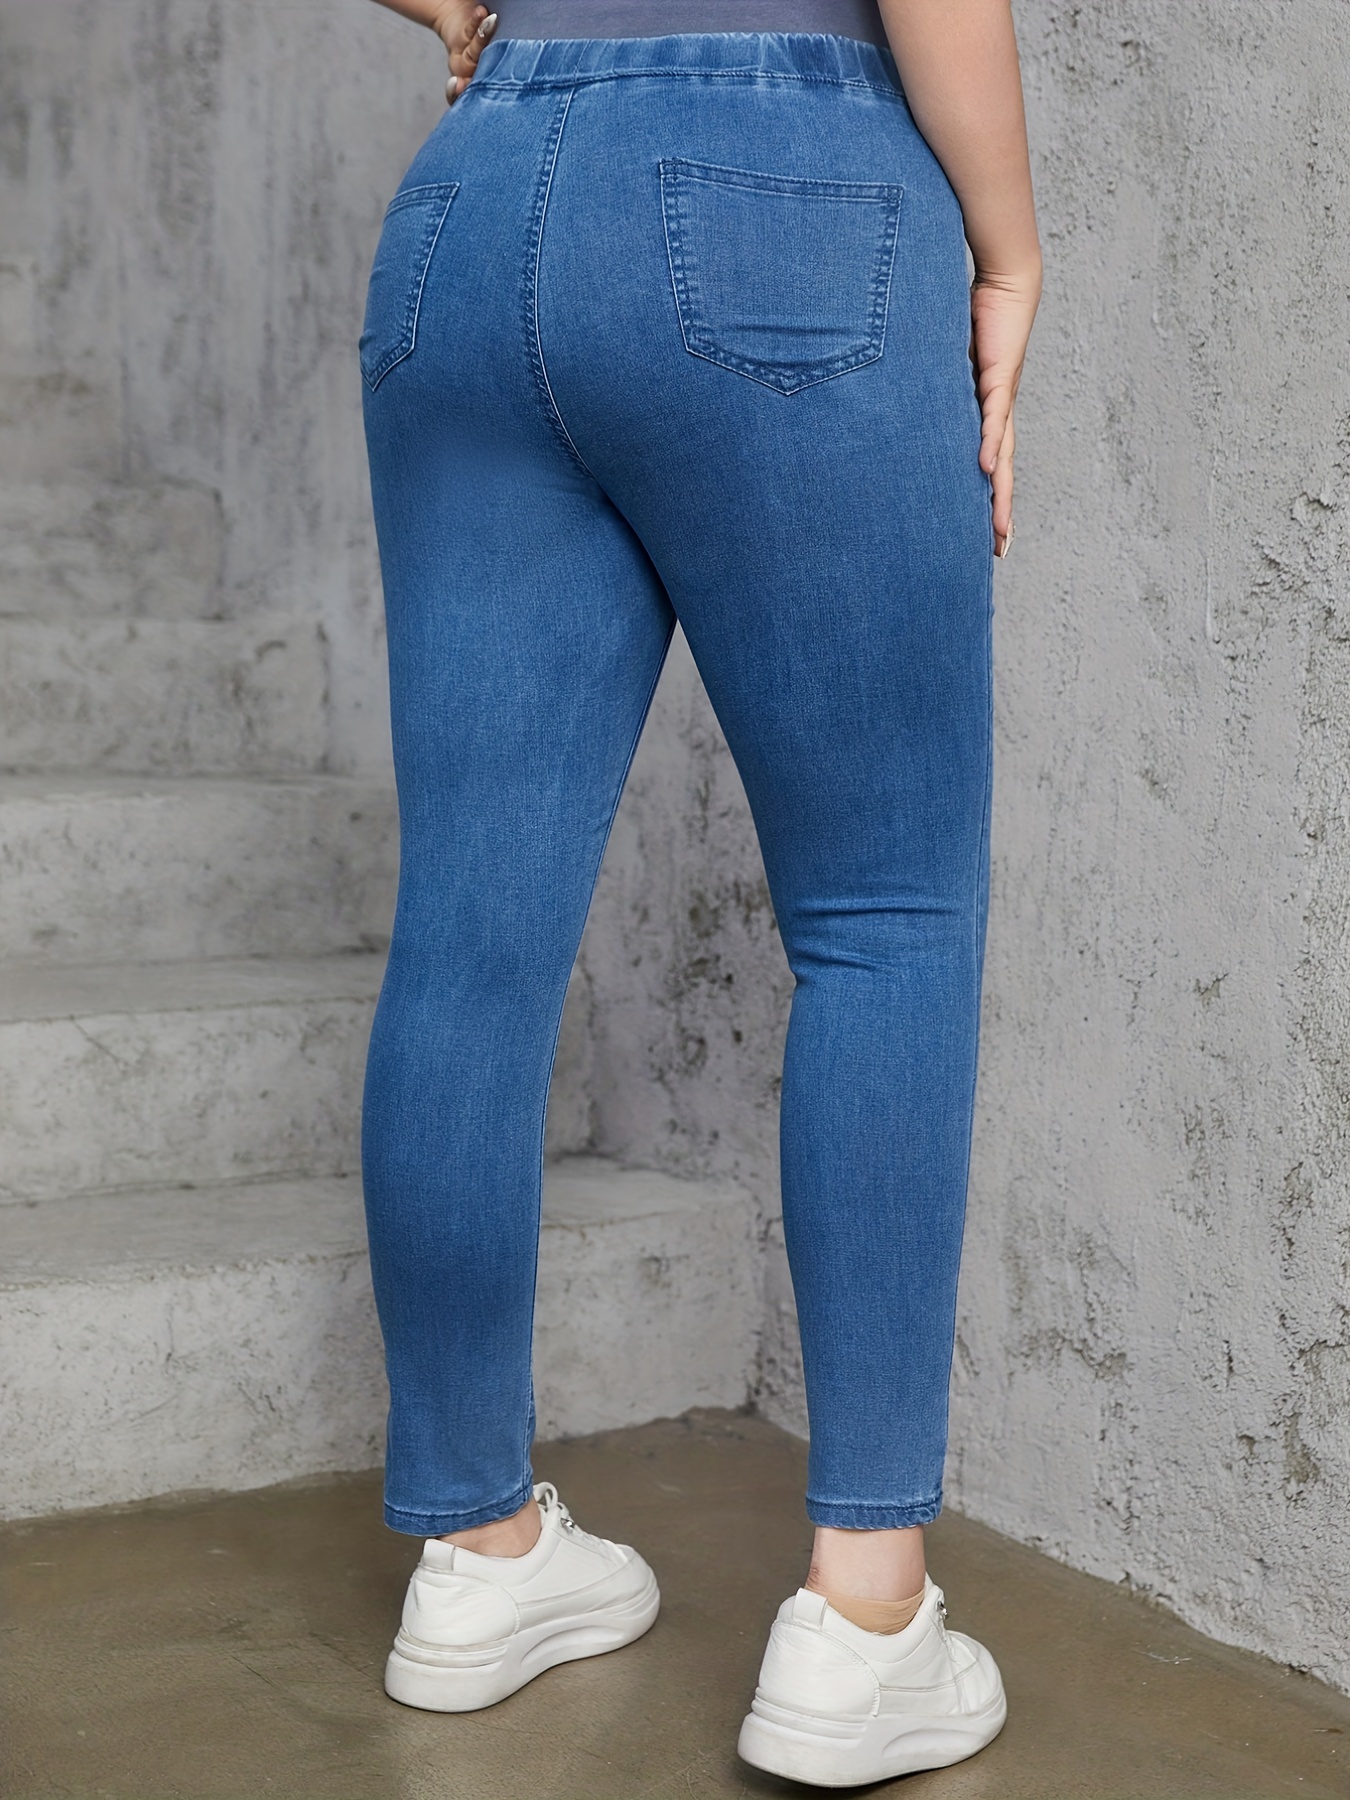 Women's Fashion New Hot Skinny Stretch High Rise Plus Size Pencil Denim Pants  Jeans - China Denim Jeans and Jeans price